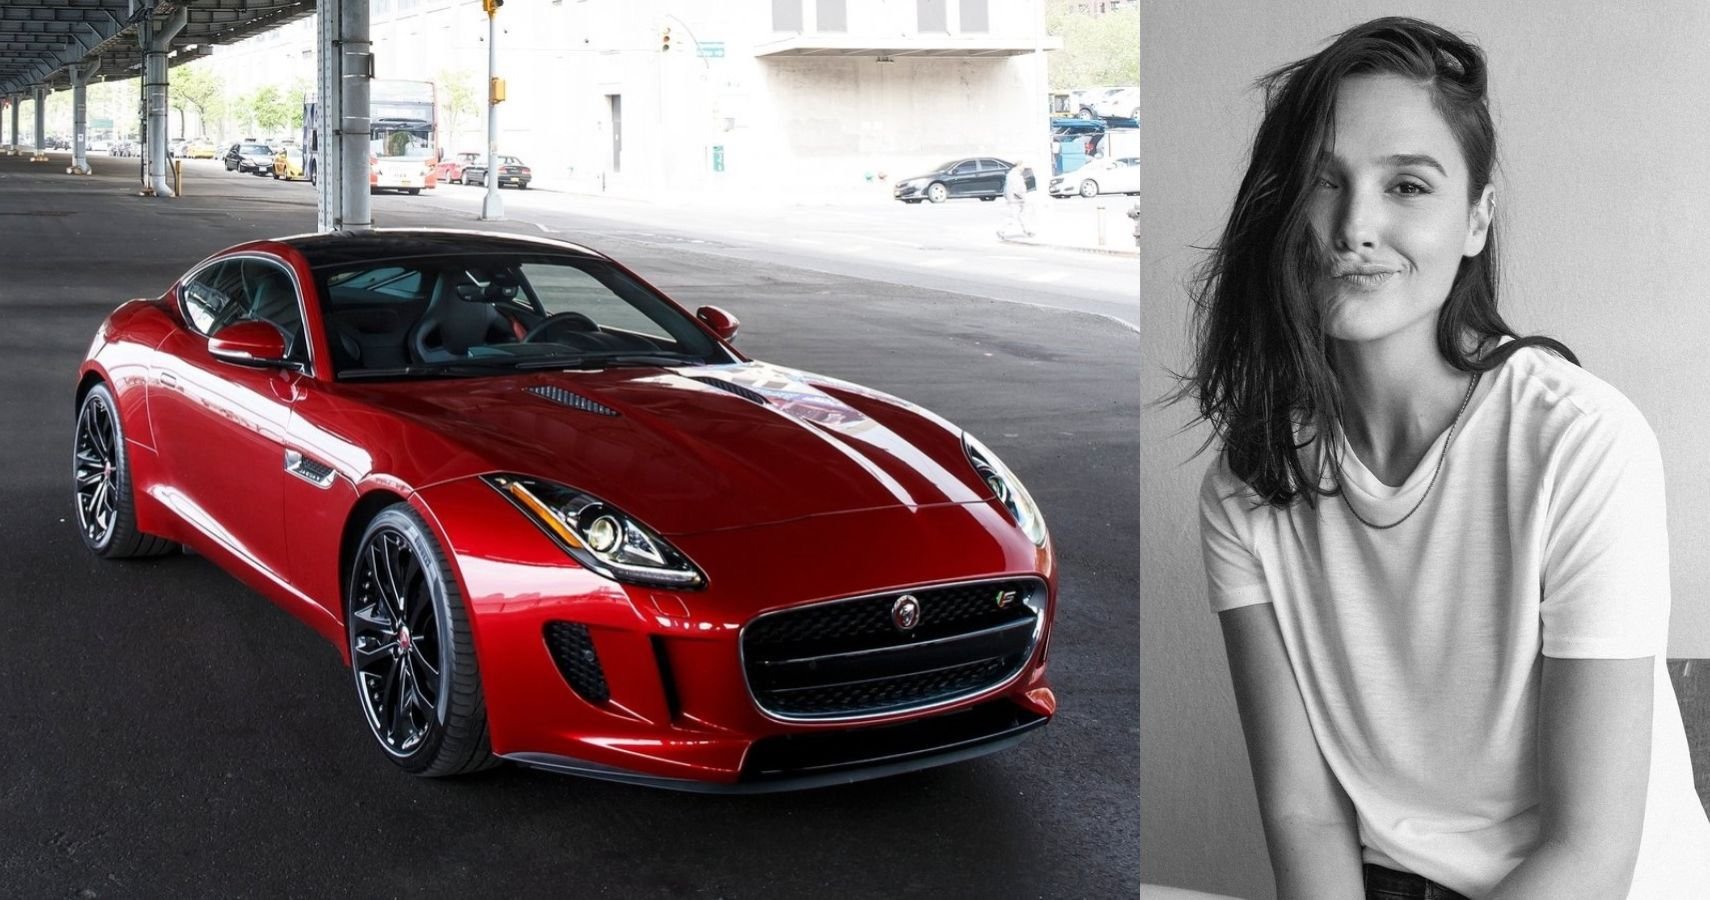 Check Out These Cool Rides From Gal Gadot's Car Collection